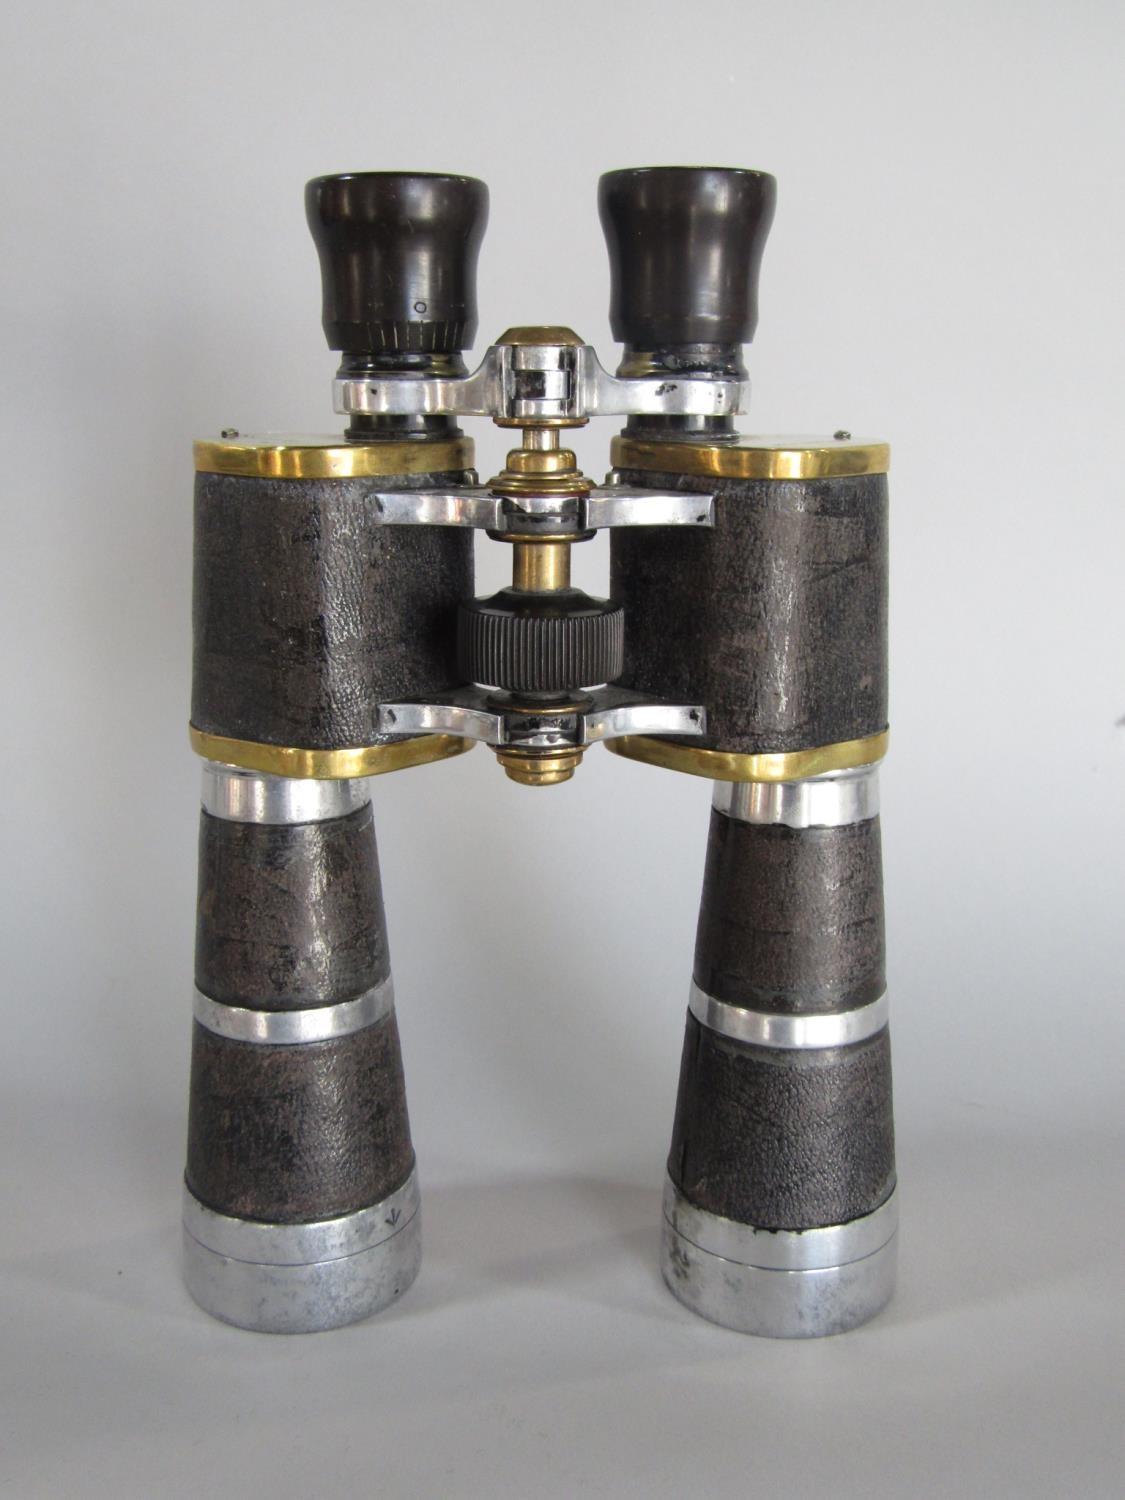 Good quality pair of leather clad WWI brass binoculars by Dollond & Aitchison The Lumina